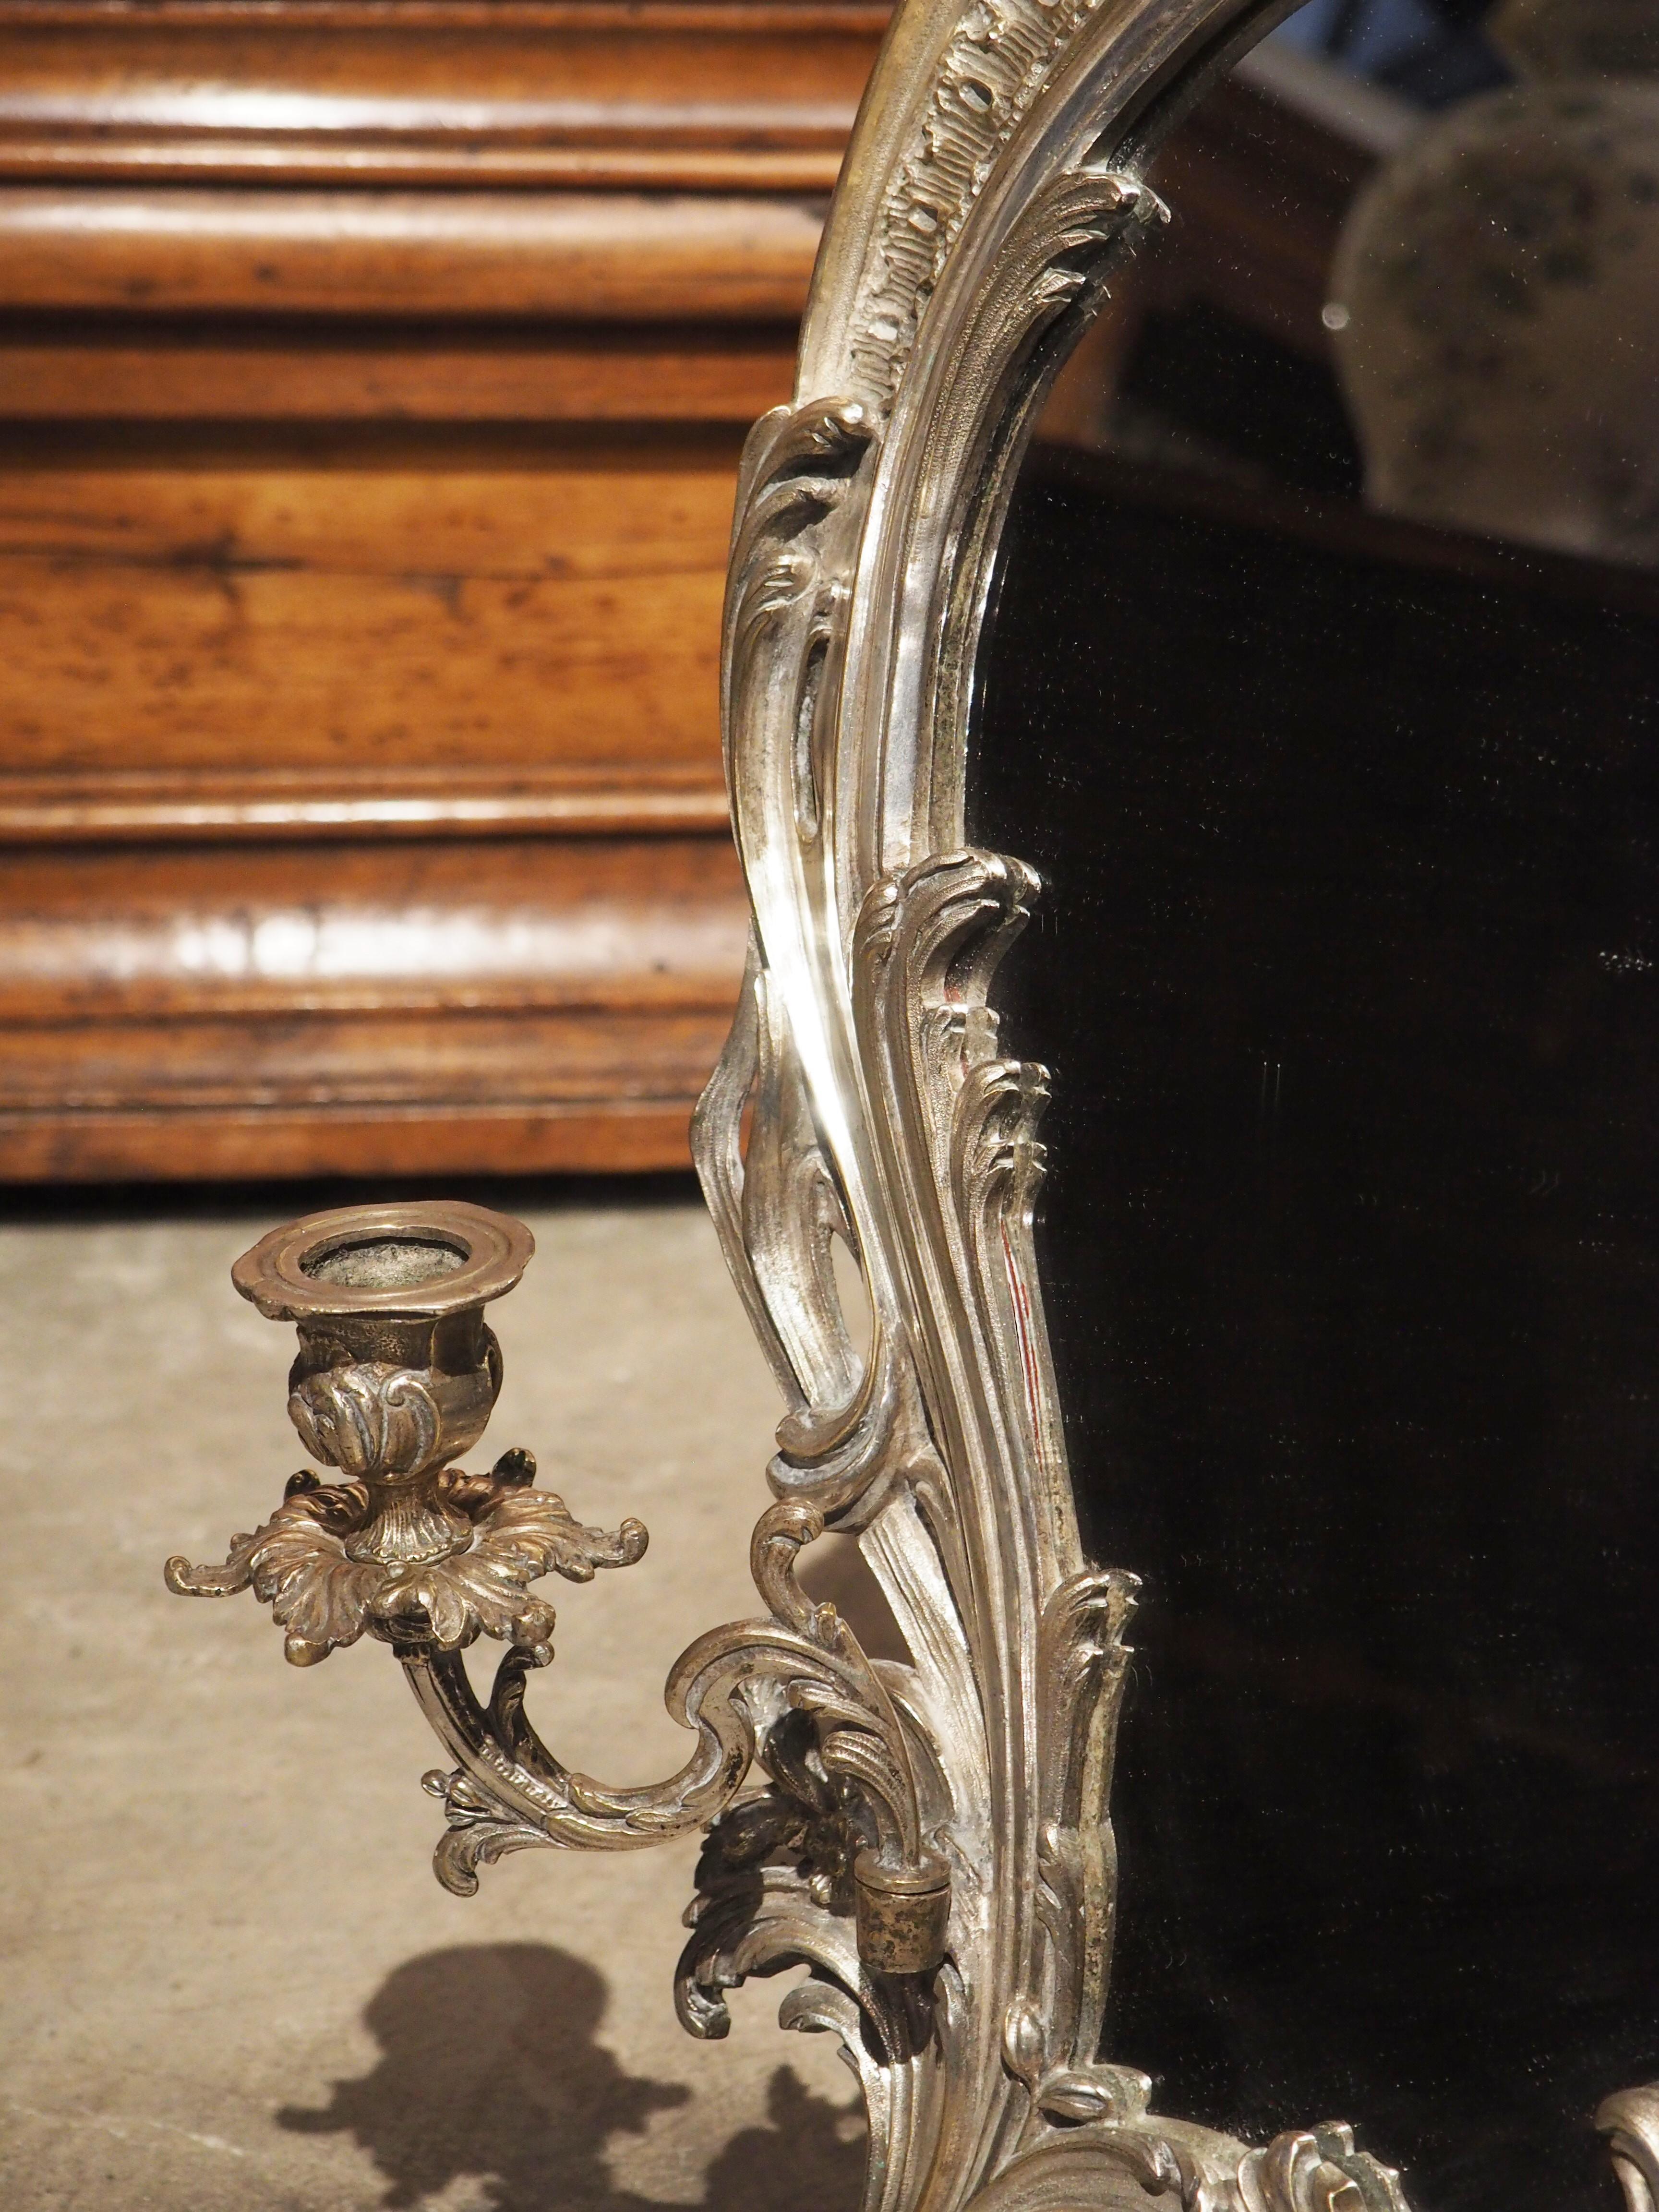 Antique French Silvered Bronze Table Mirror with Candle Holders, Circa 1850 For Sale 7